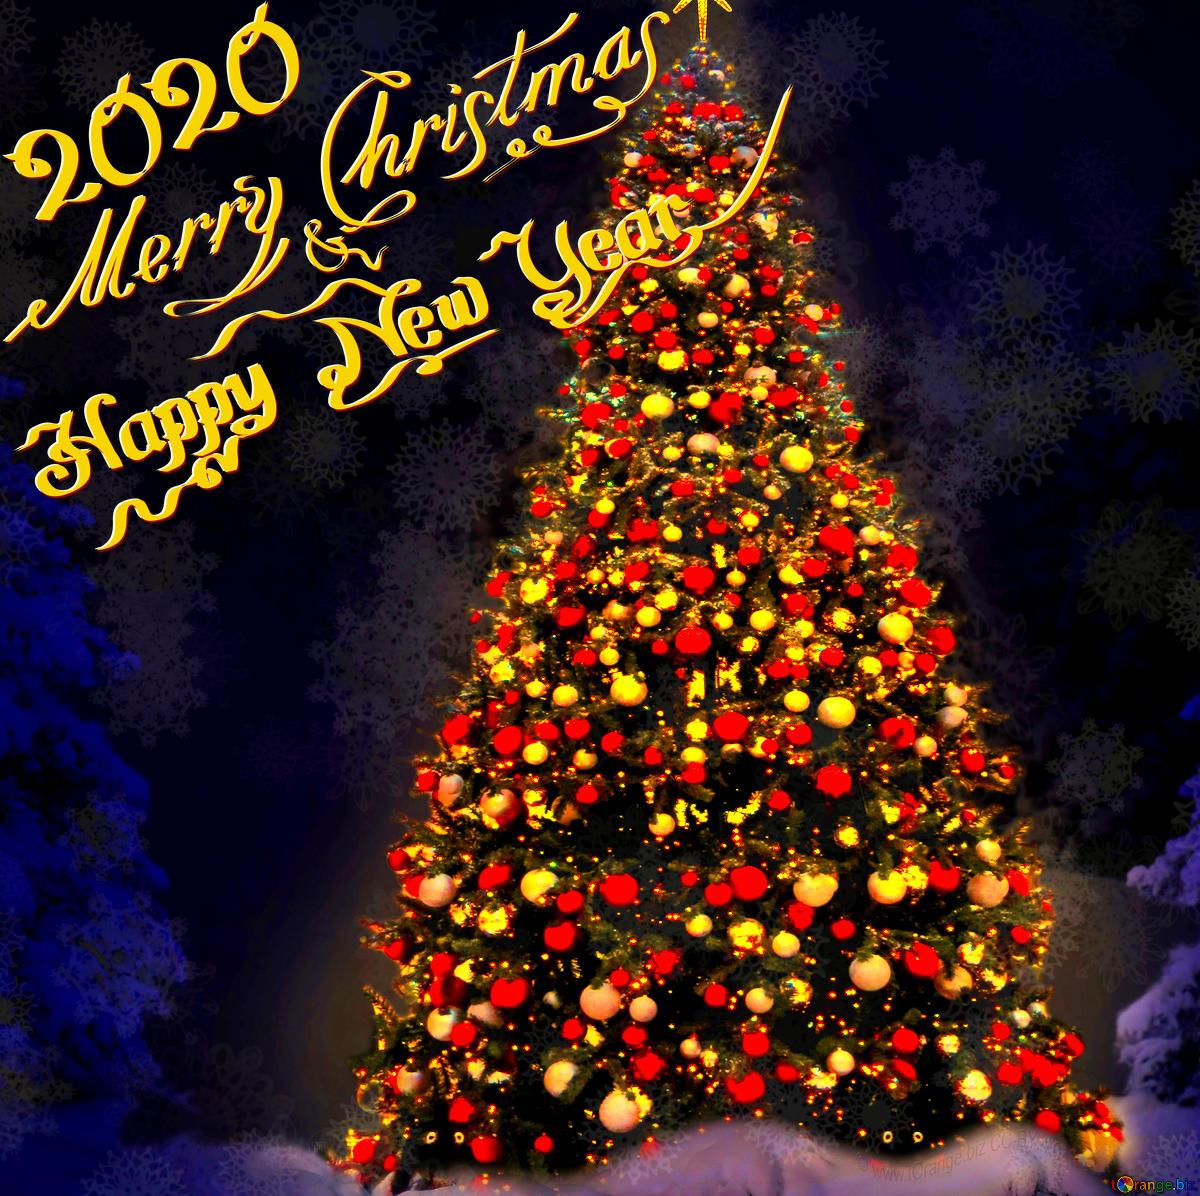 Download Free Picture 2020 Merry Christmas On CC BY License